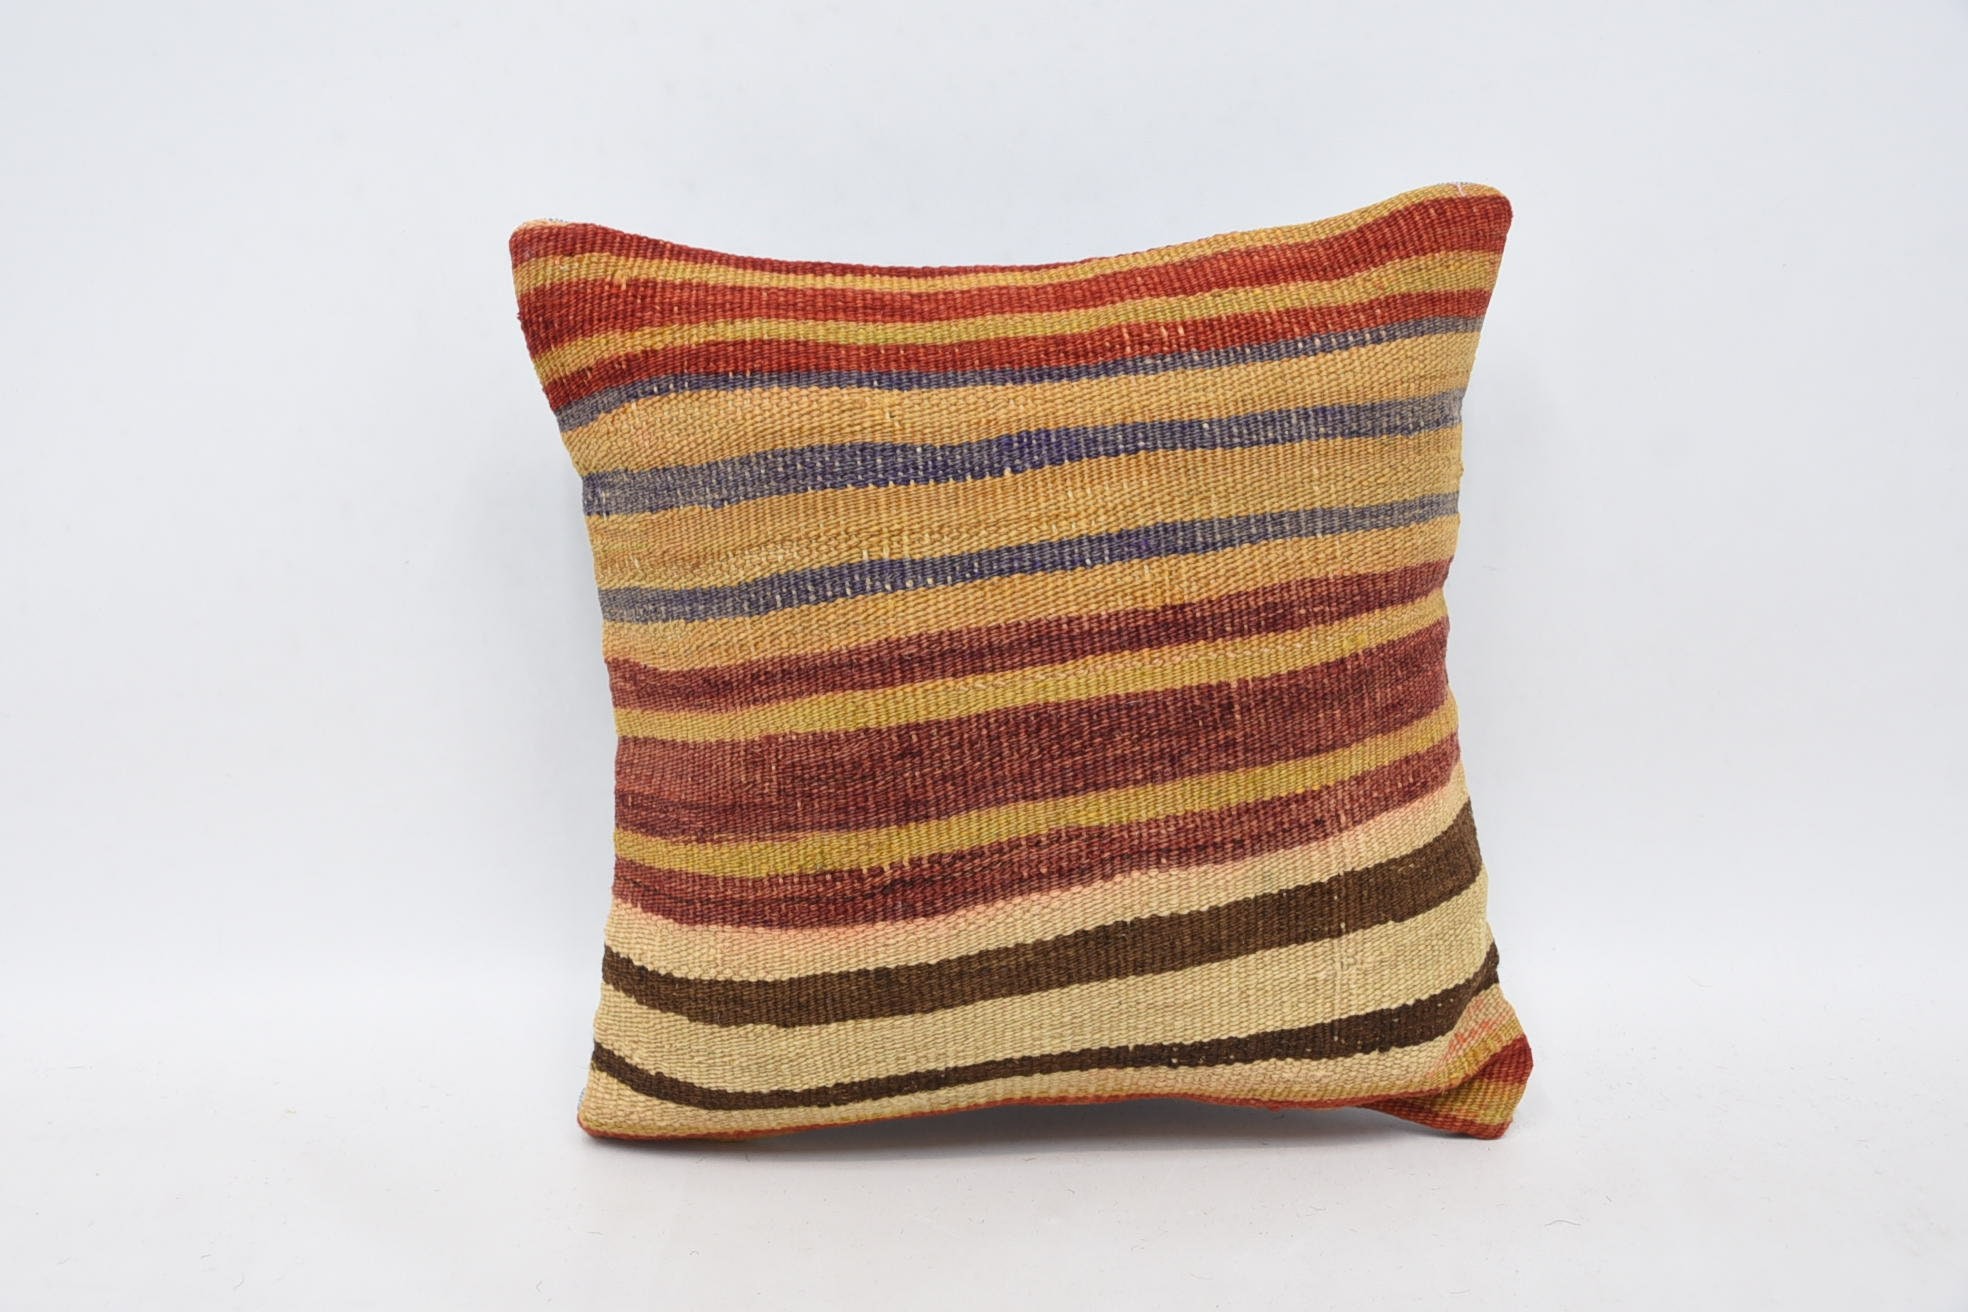 Designer Throw Cushion Cover, Kilim Pillow Cover, Vintage Kilim Pillow, Pillow for Couch, 12"x12" Red Pillow, Pastel Pillow Case